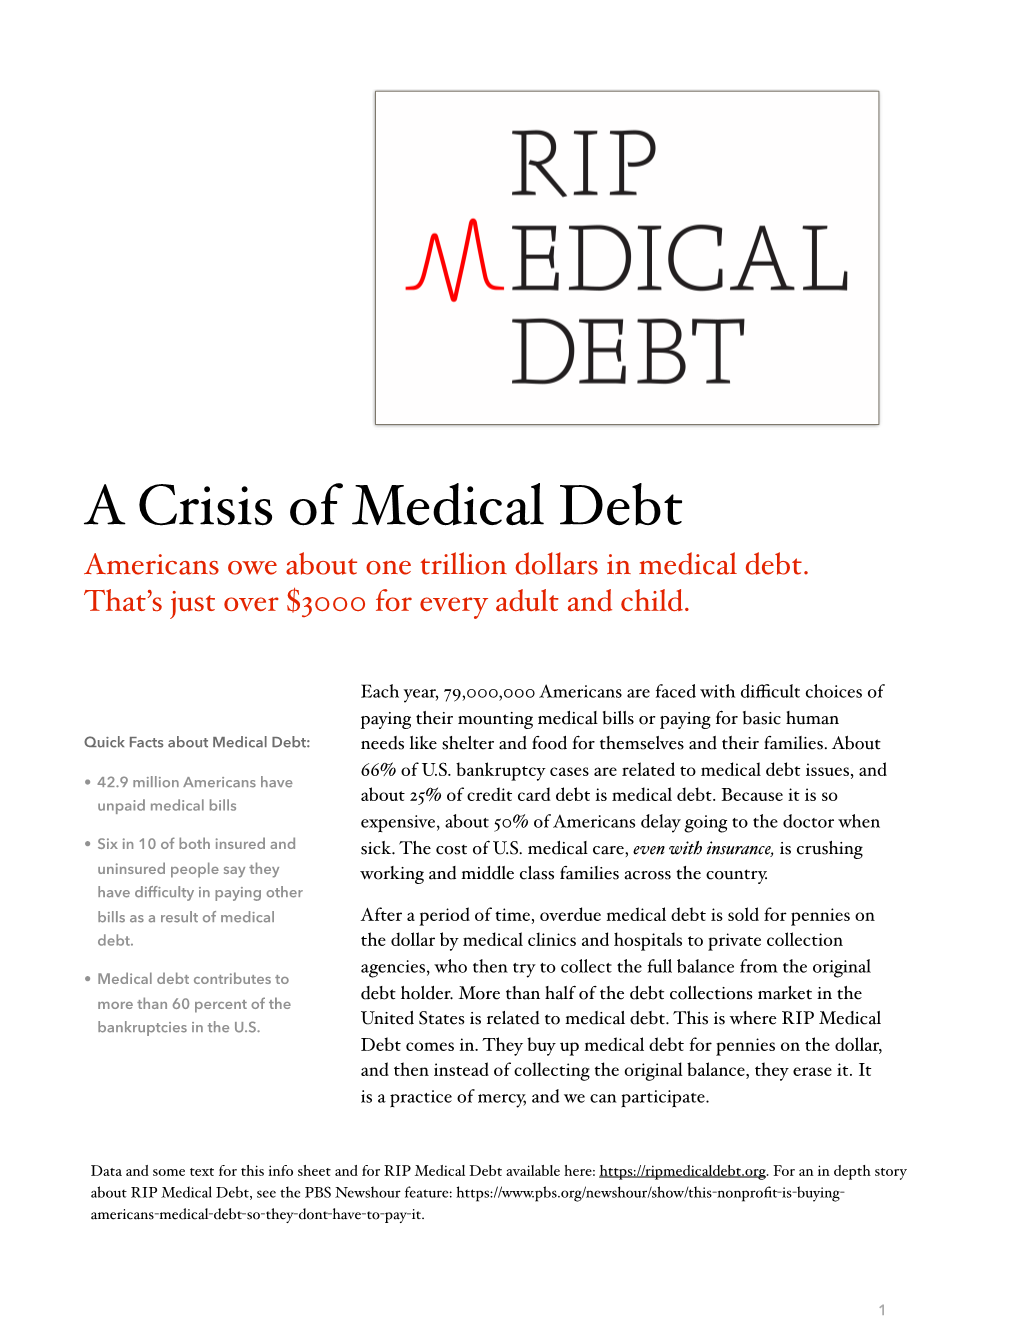 A Crisis of Medical Debt Americans Owe About One Trillion Dollars in Medical Debt